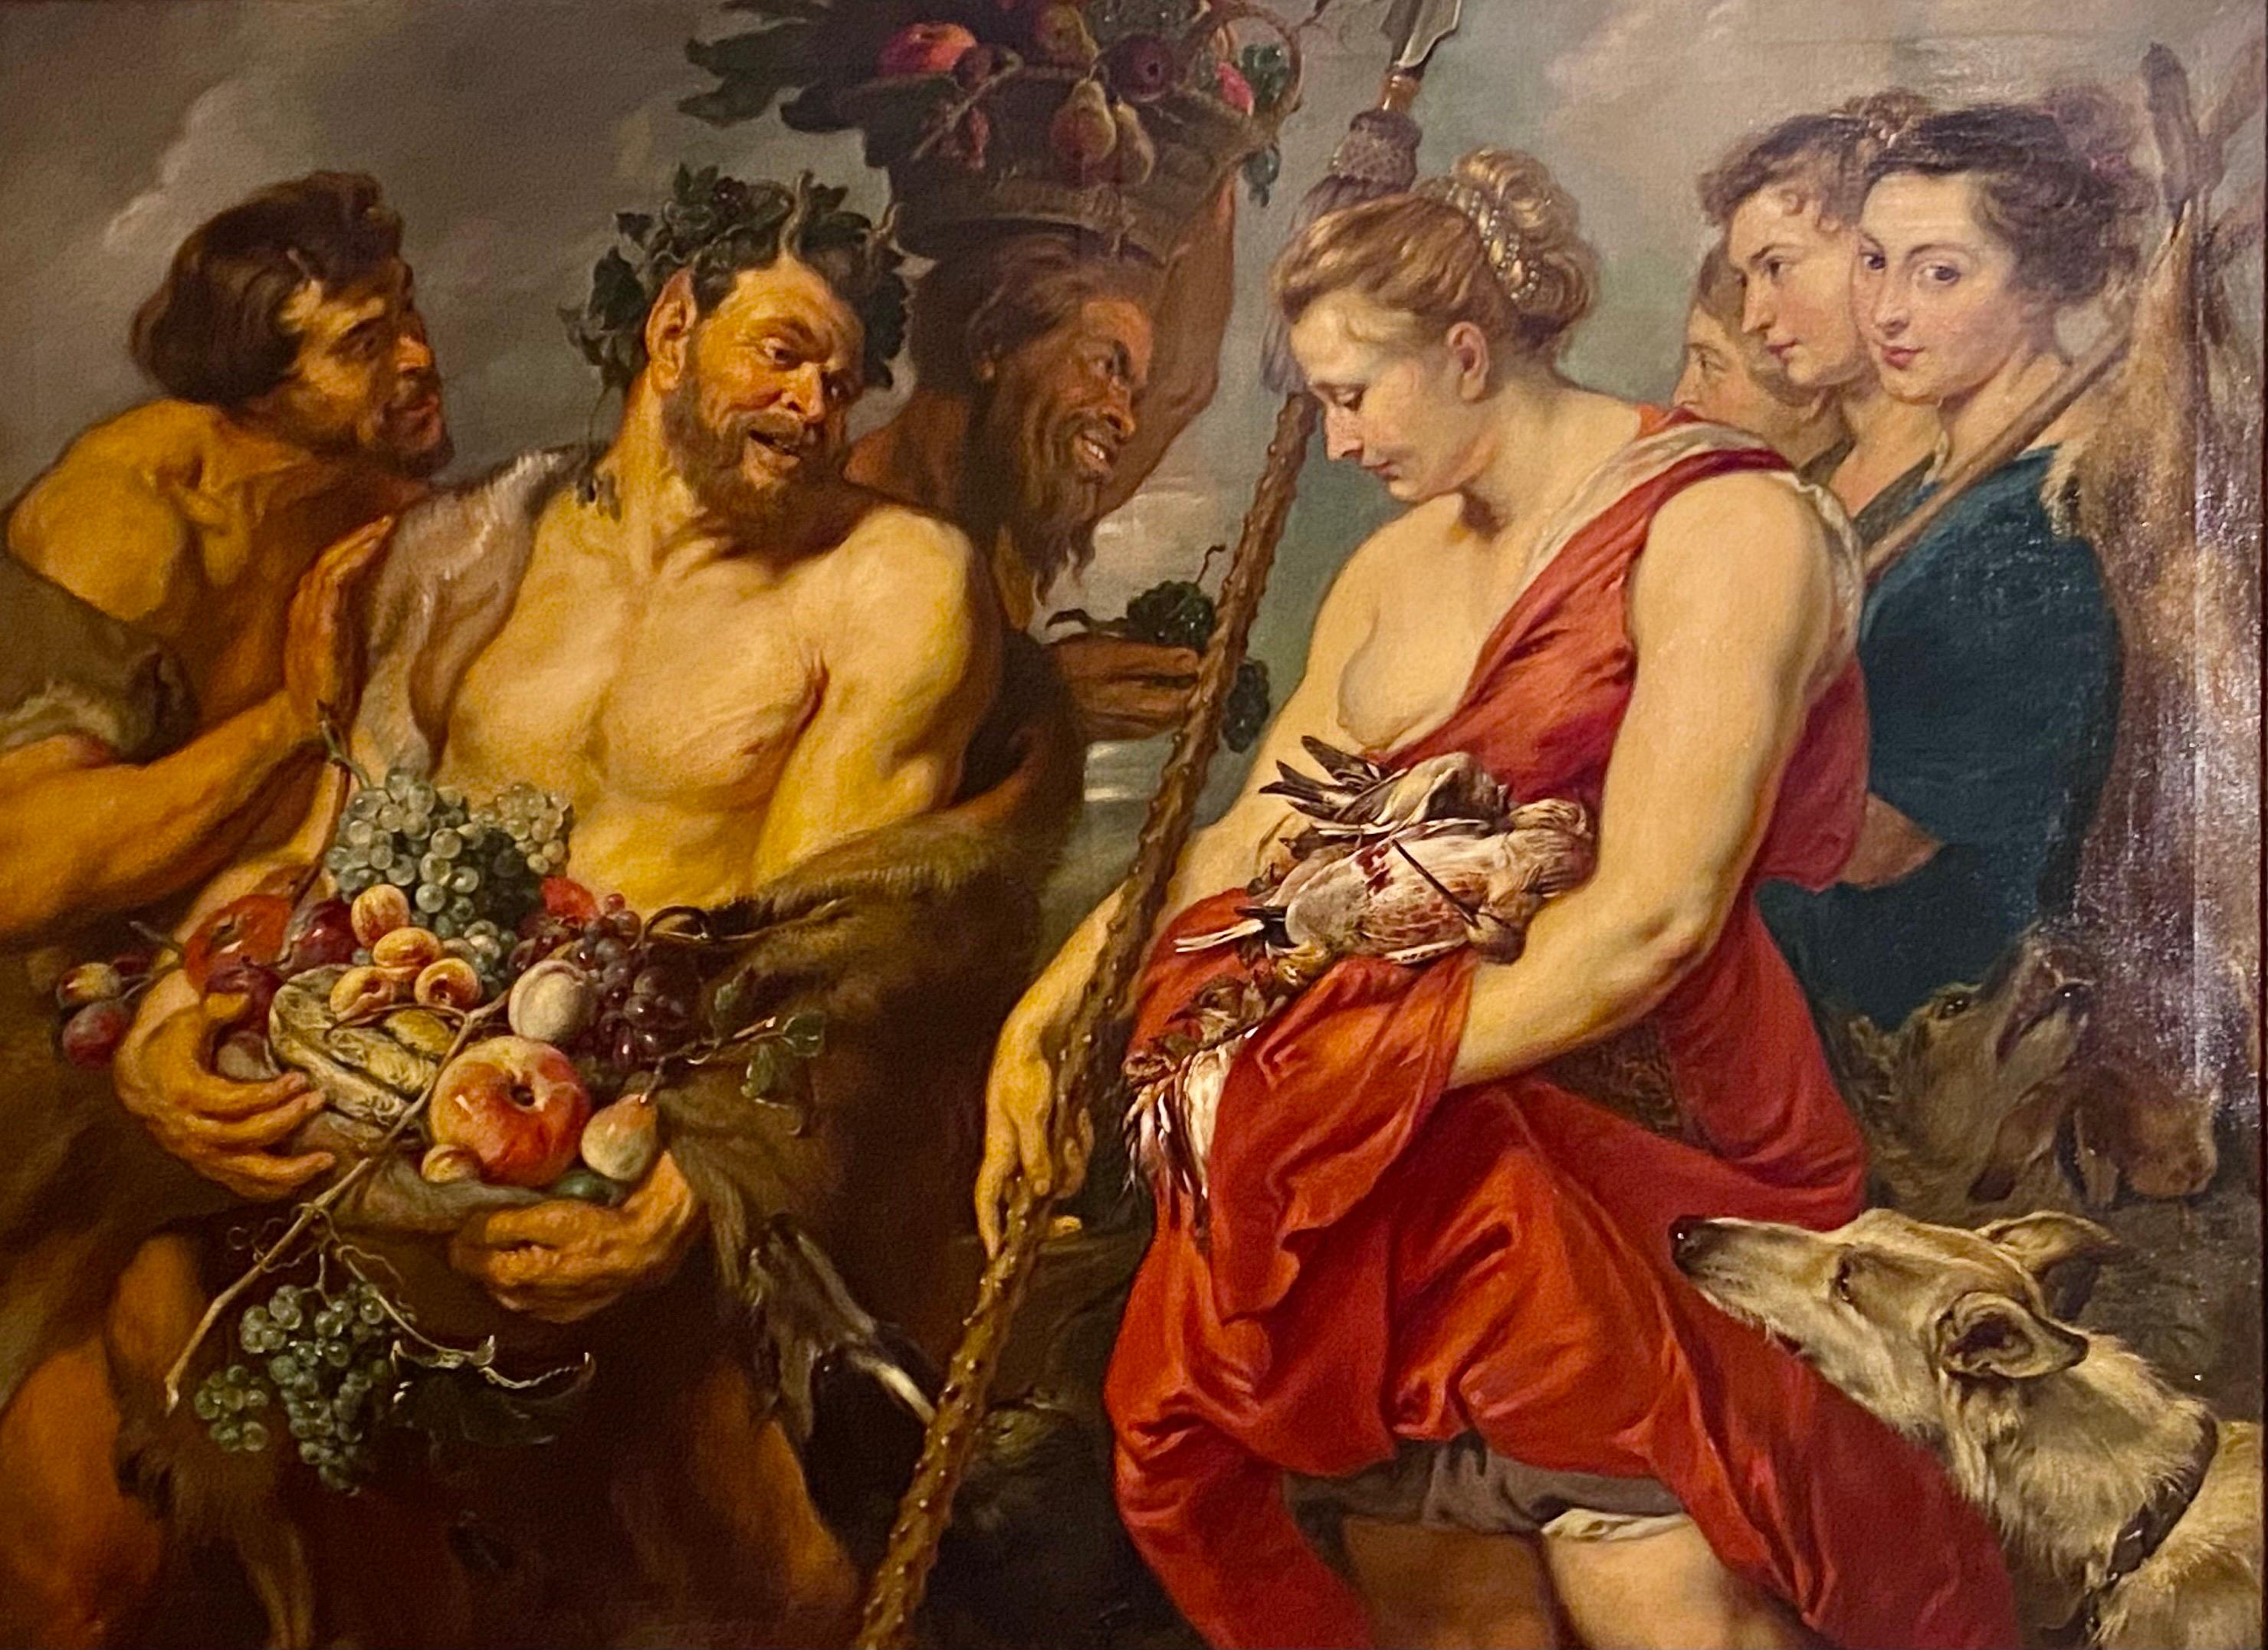 Rubens designed the theme of “Diana Returning from the Hunt” as an idyllic scene celebrating abundance and the daily rejuvenation of nature, as well as the sensuality of female beauty. With the format of the painting, with the figures depicted to